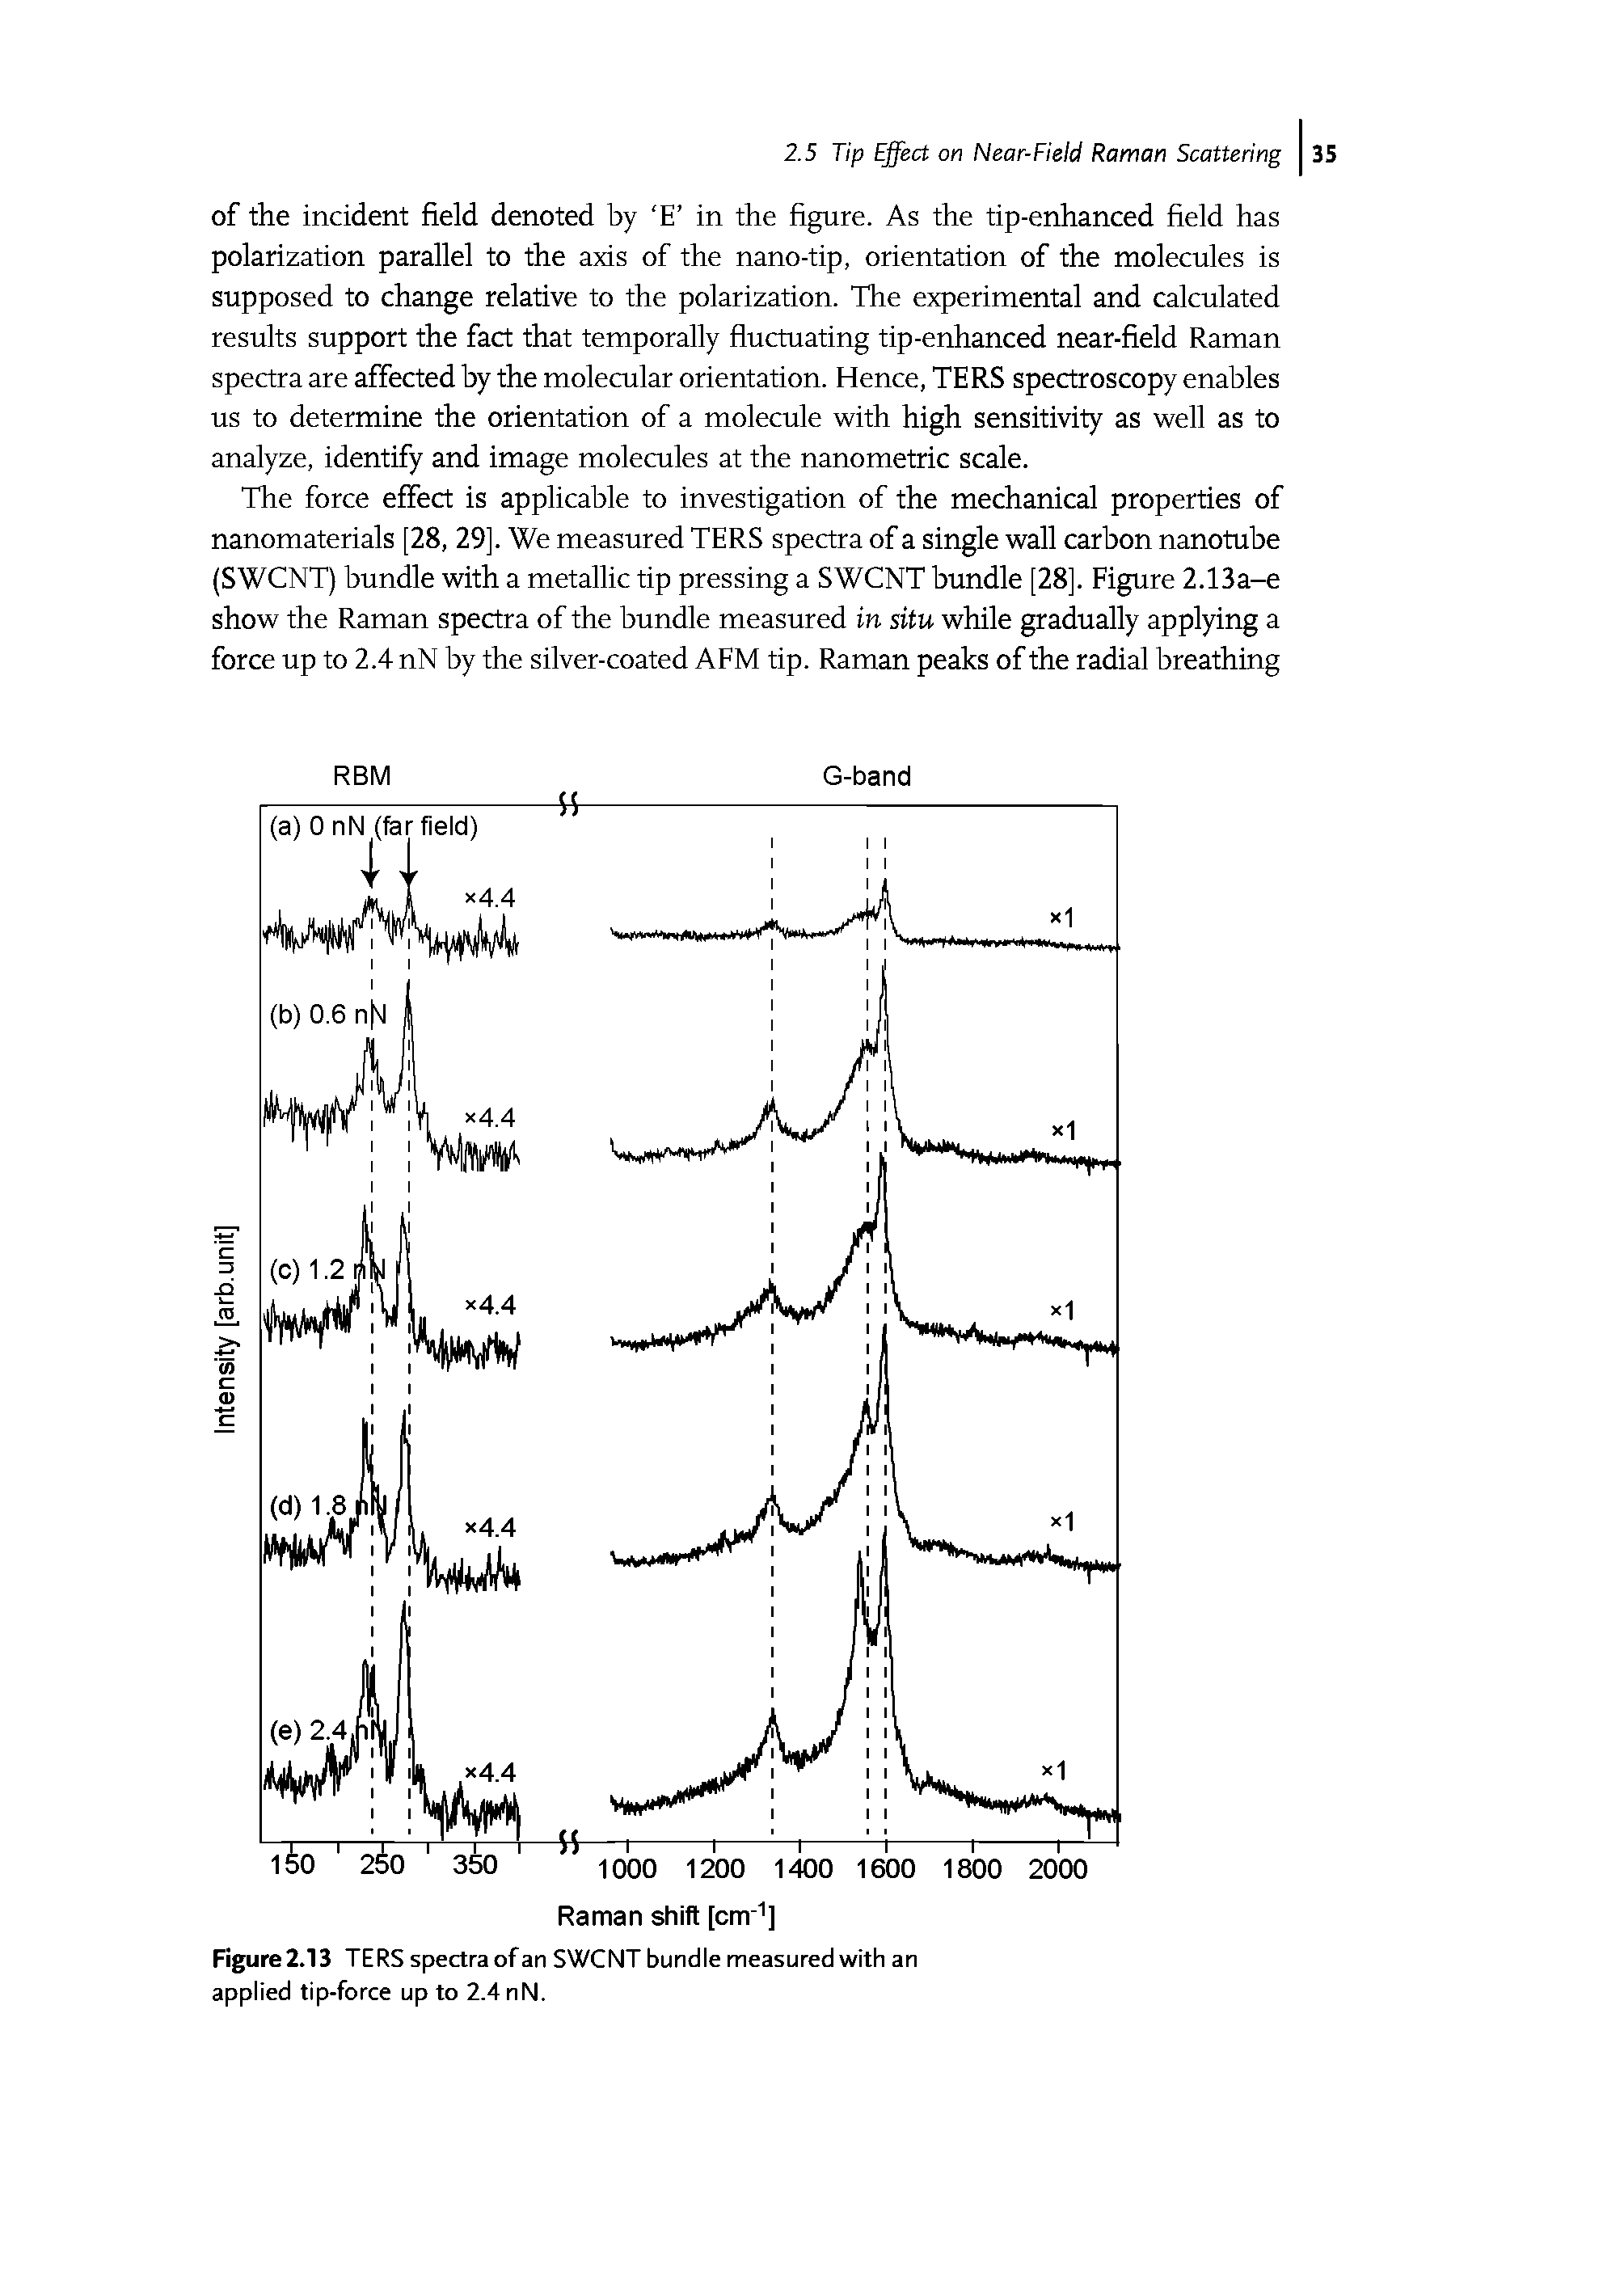 Figure 2.13 TERS spectra of an SWCNT bundle measured with an applied tip-force up to 2.4 nN.